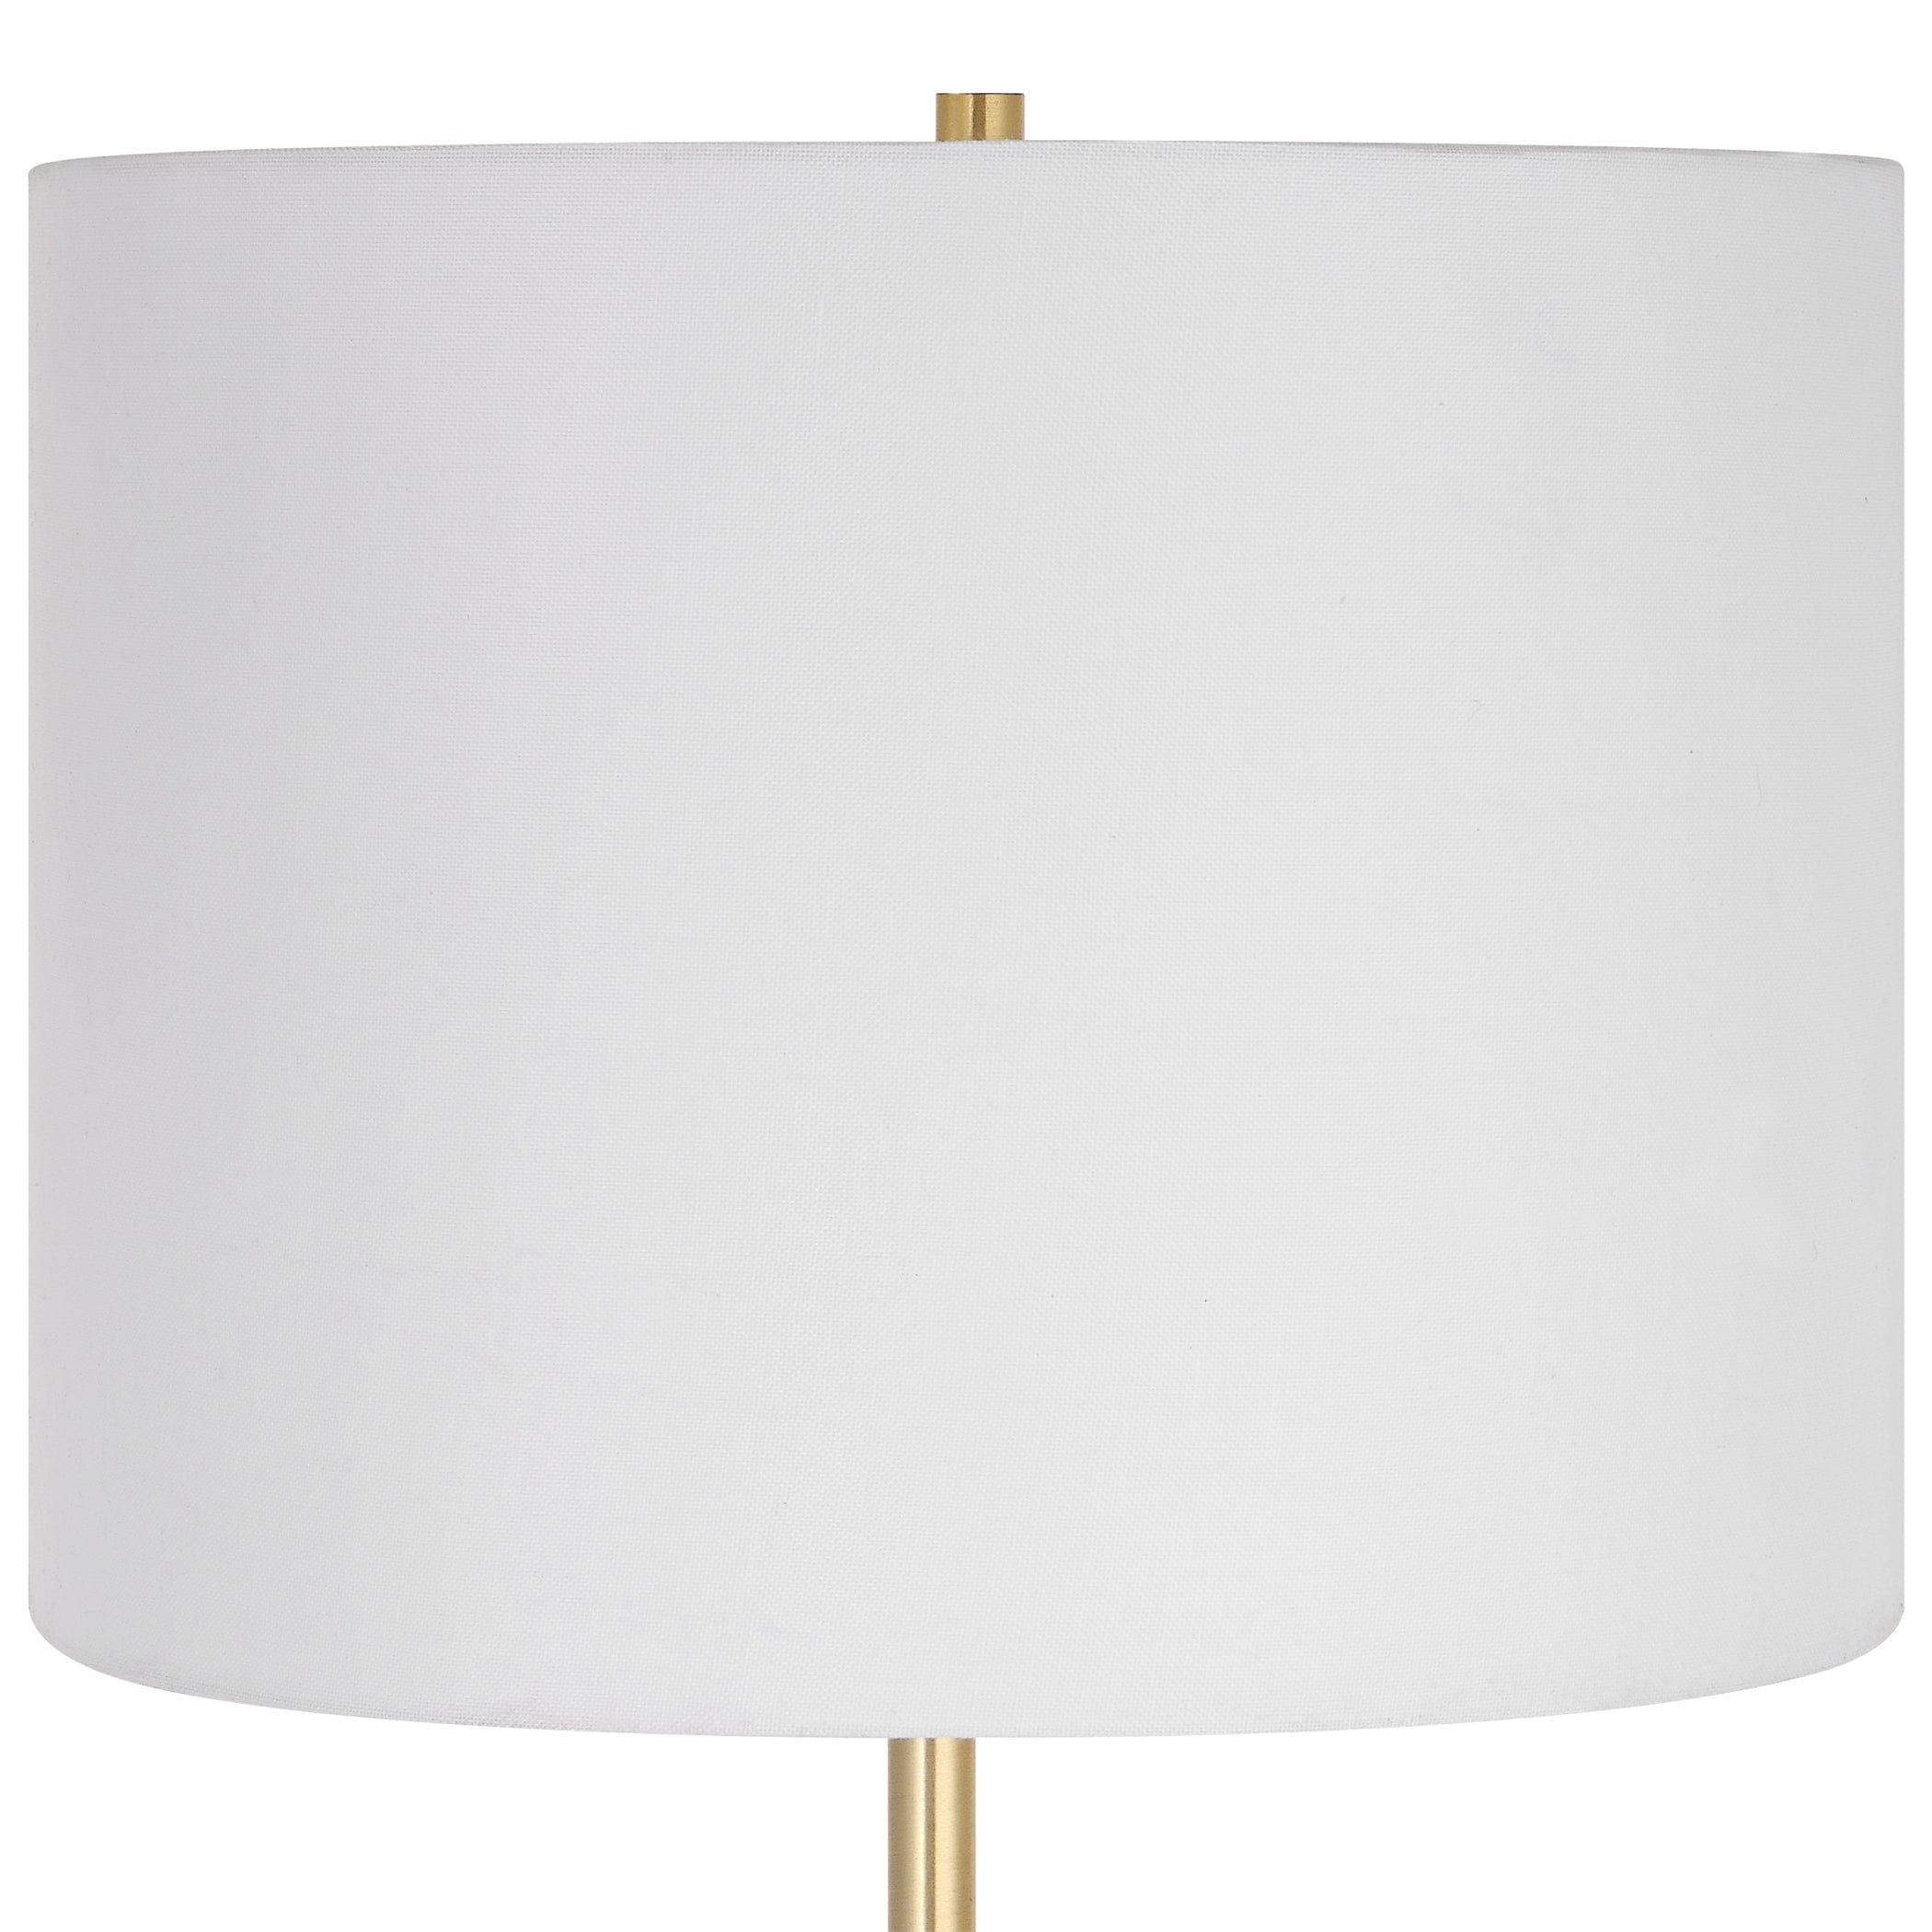 Table Lamp - W26099-1 Uttermost